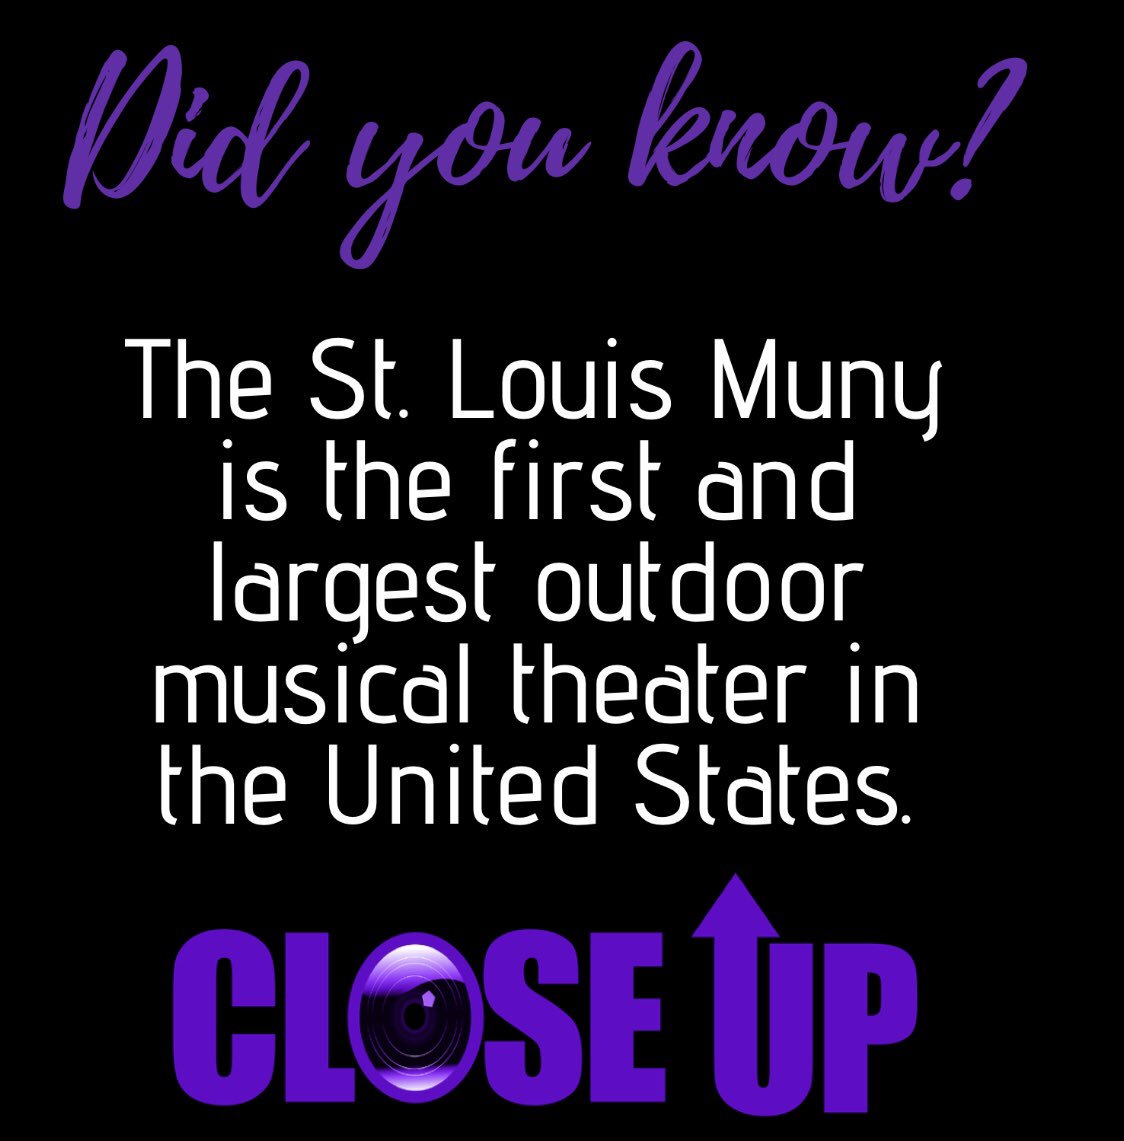 Happy Monday! Let’s start off the week with a fun fact about the city that you may not have known. #DidYouKnow that the @themuny was the FIRST musical theater in the US? 🤯
 #STL  #Art #StlEvents  #Network #StlNews #LocalTalent #Culture #Theater #Muny #Theatre #Music #Dance